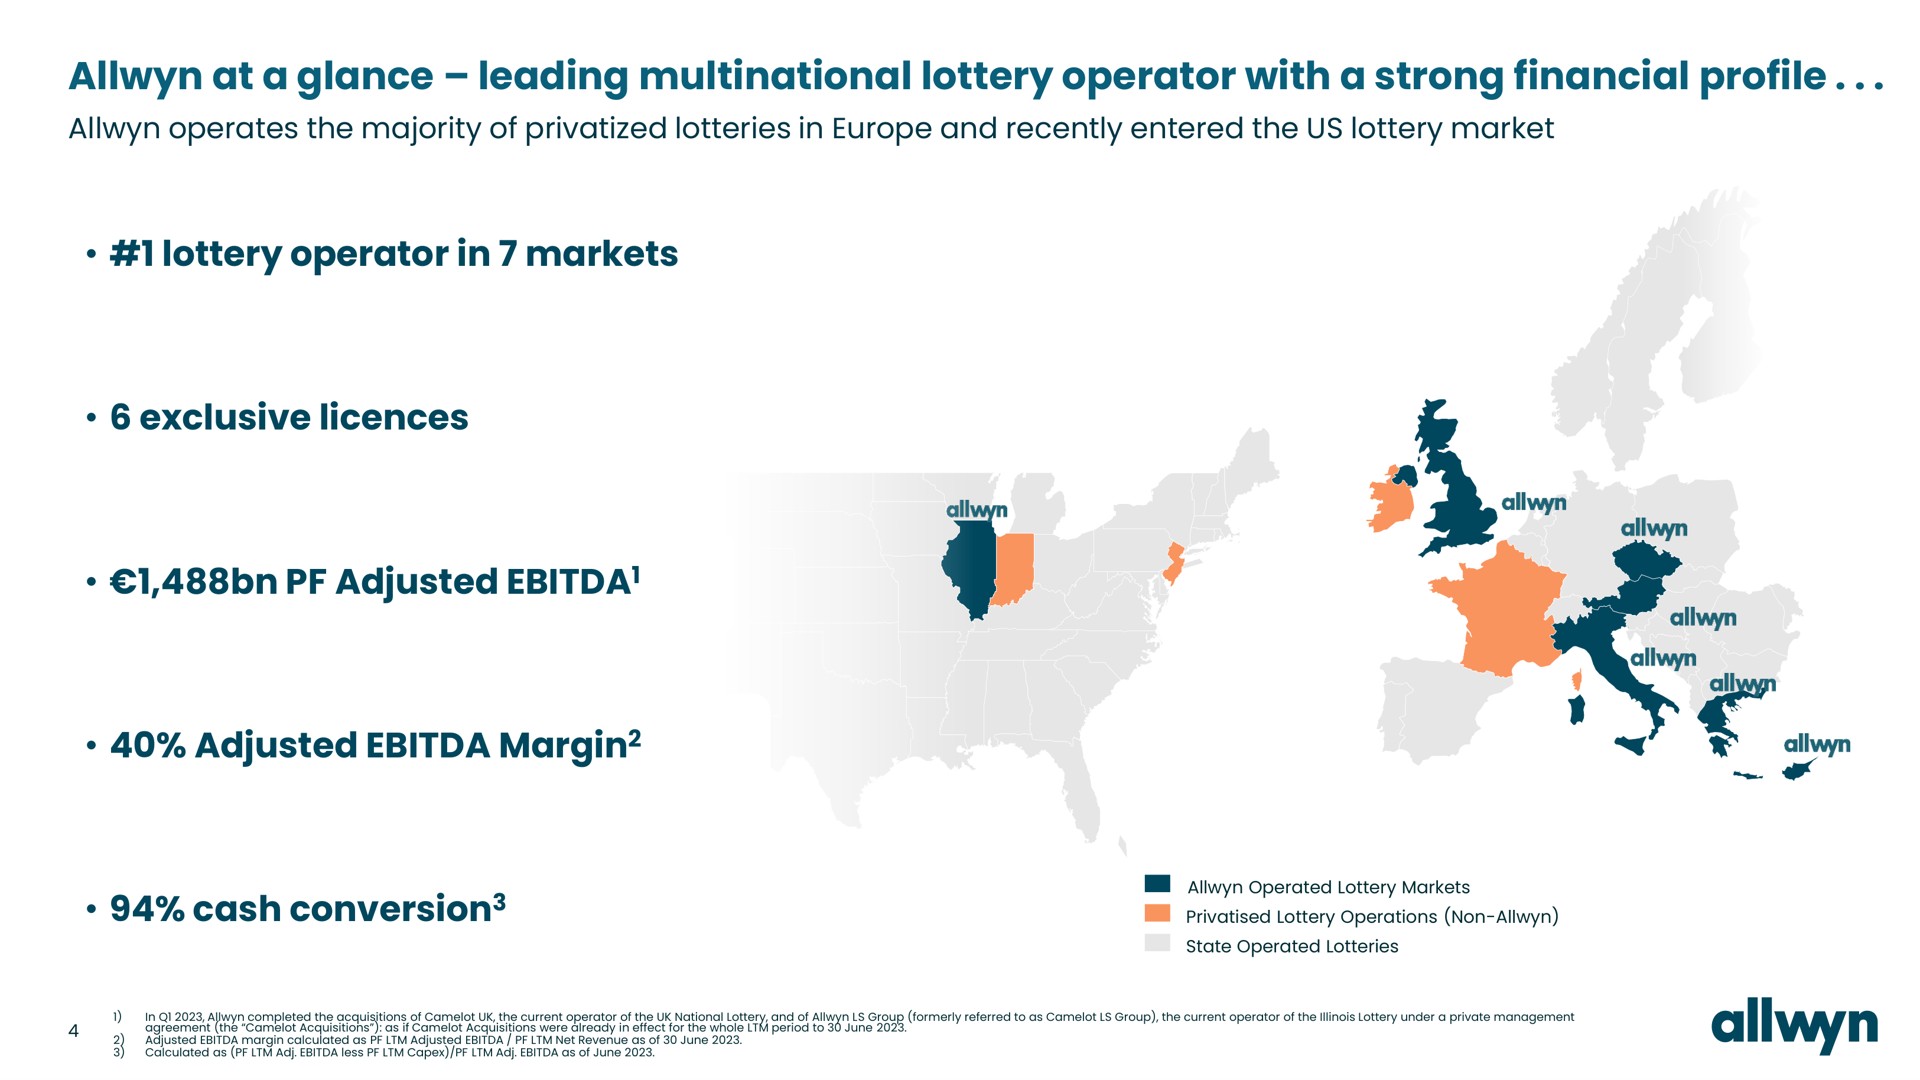 at a glance leading multinational lottery operator with a strong financial profile lottery operator in markets exclusive adjusted adjusted margin cash conversion margin sion | Allwyn